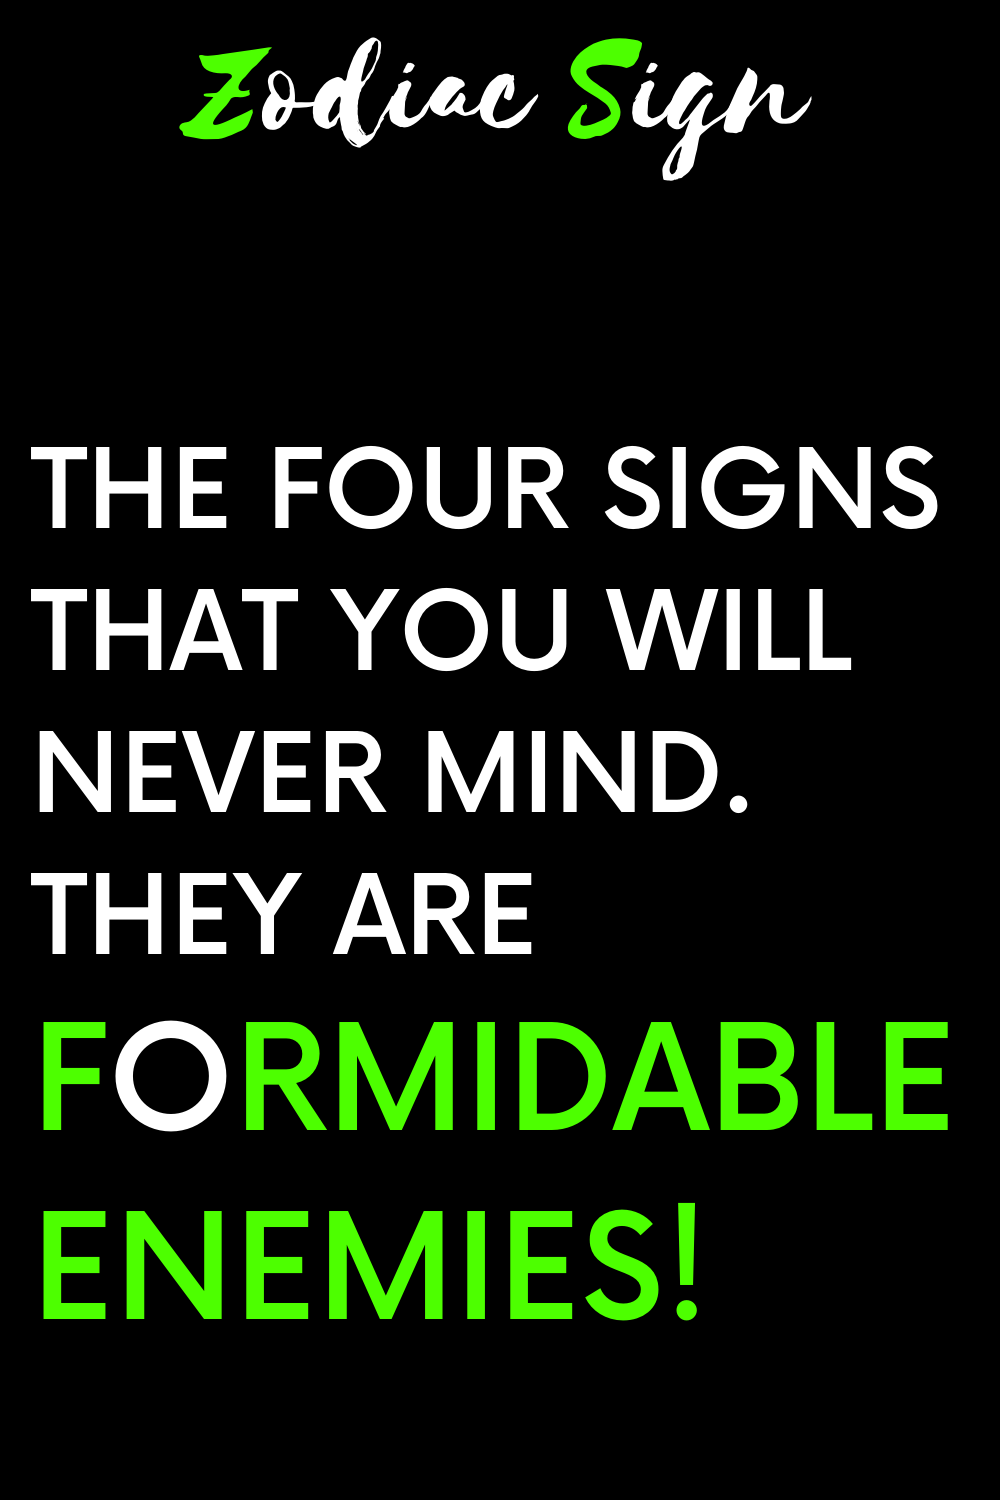 The four signs that you will never mind. They are formidable enemies!